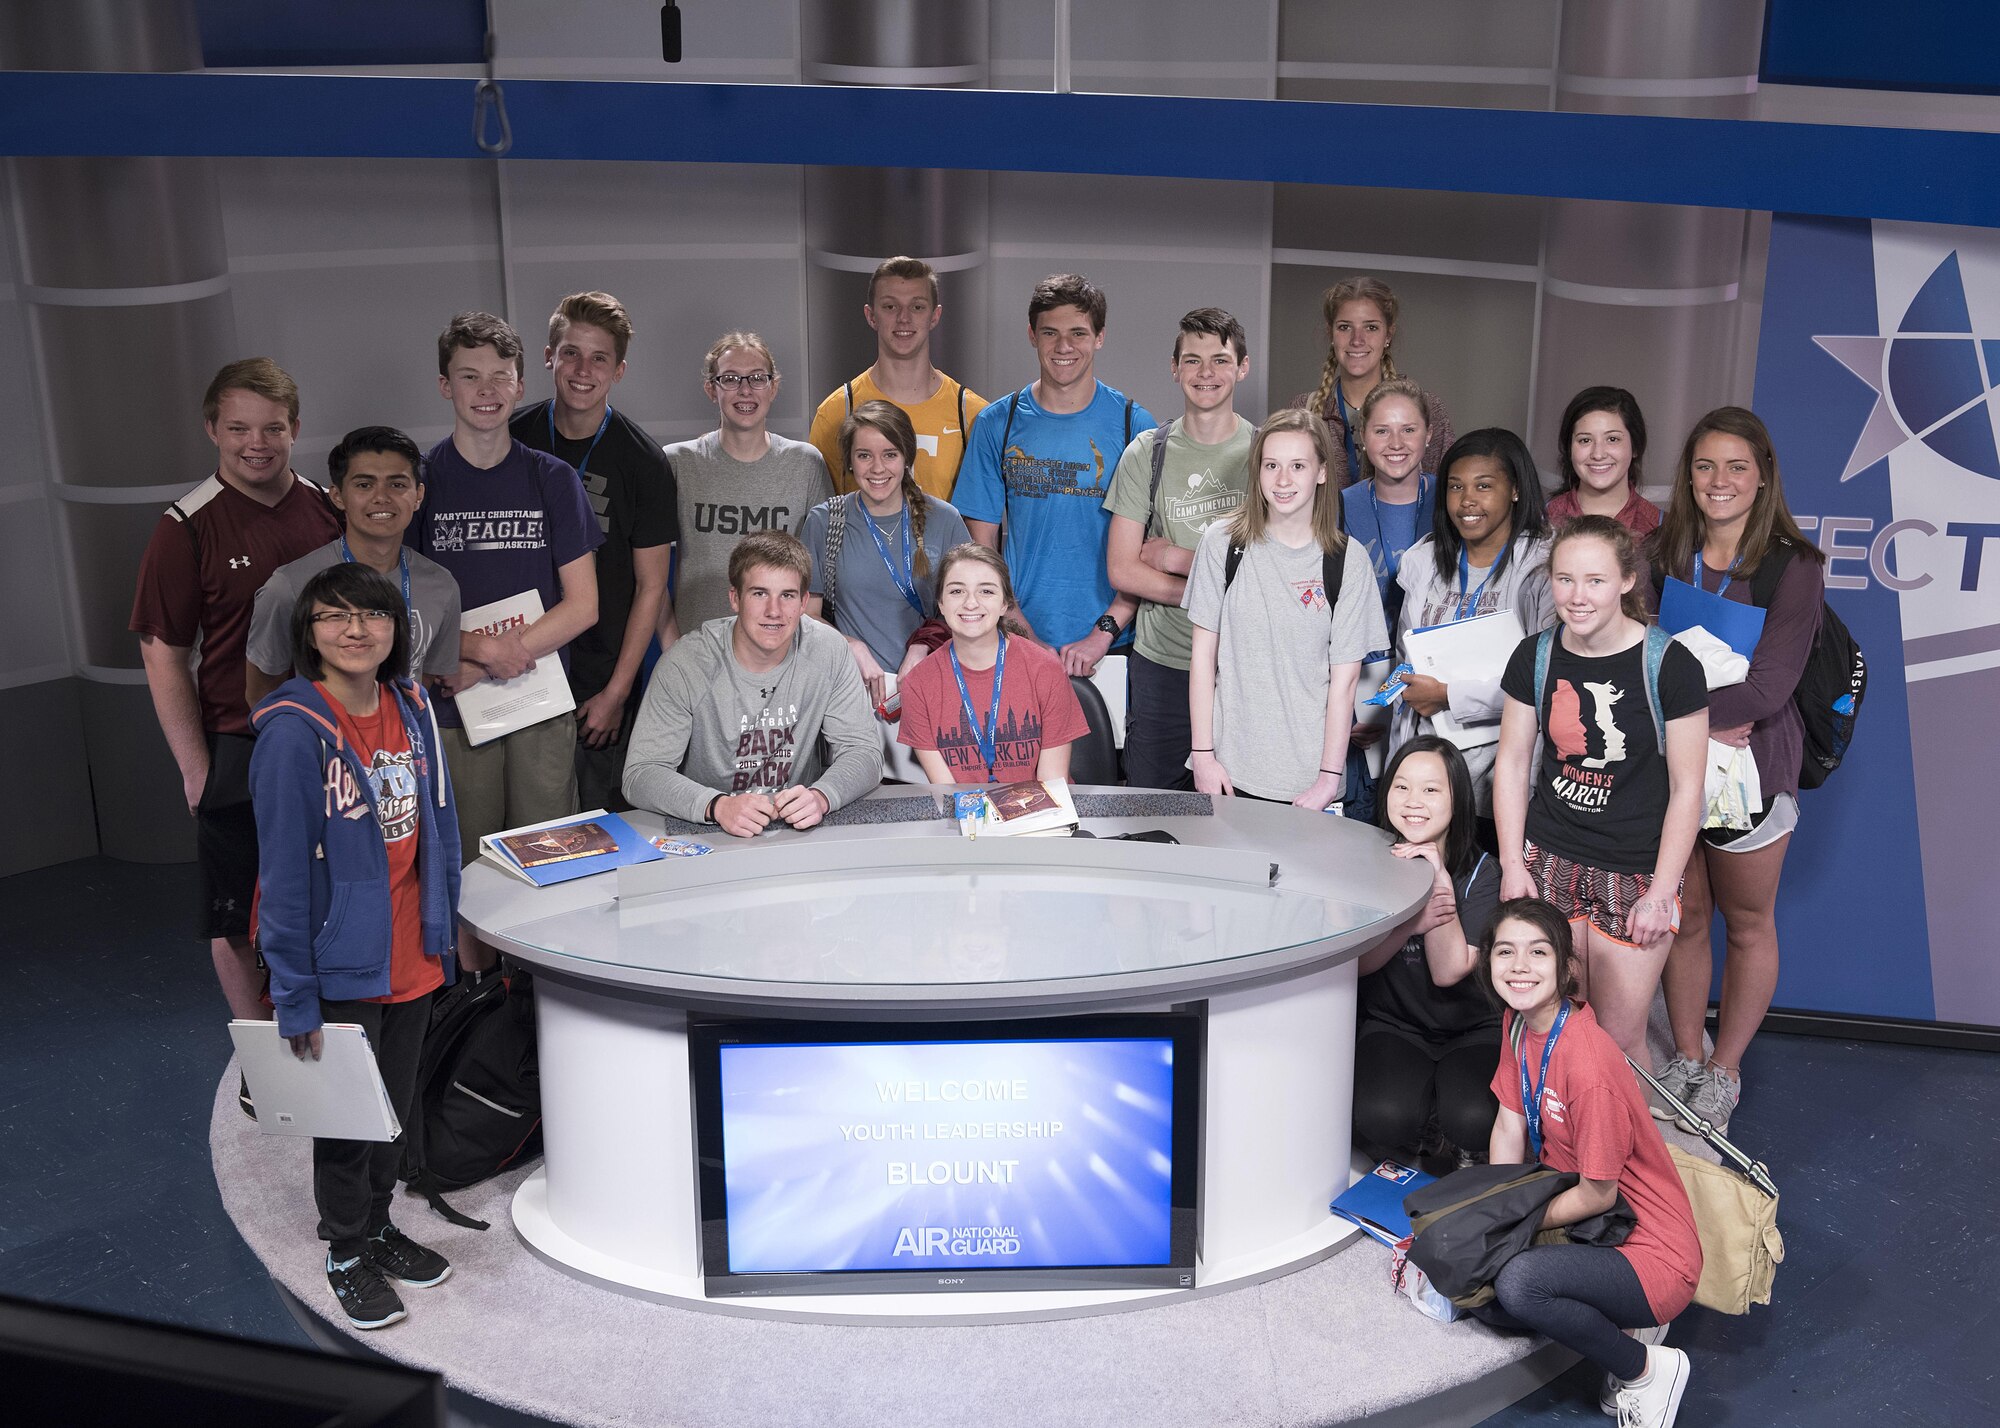 Students with Youth Leadership Blount take a television studio tour at the Air National Guard’s I.G. Brown Training and Education Center April 18, 2017, as part of their leadership day. The students met the commander, took a 4 Lenses assessment, toured the TEC TV studios and played a game of flicker ball before leaving McGhee Tyson Air National Guard Base for other area events. (U.S. Air National Guard photo by Master Sgt. Mike R. Smith)